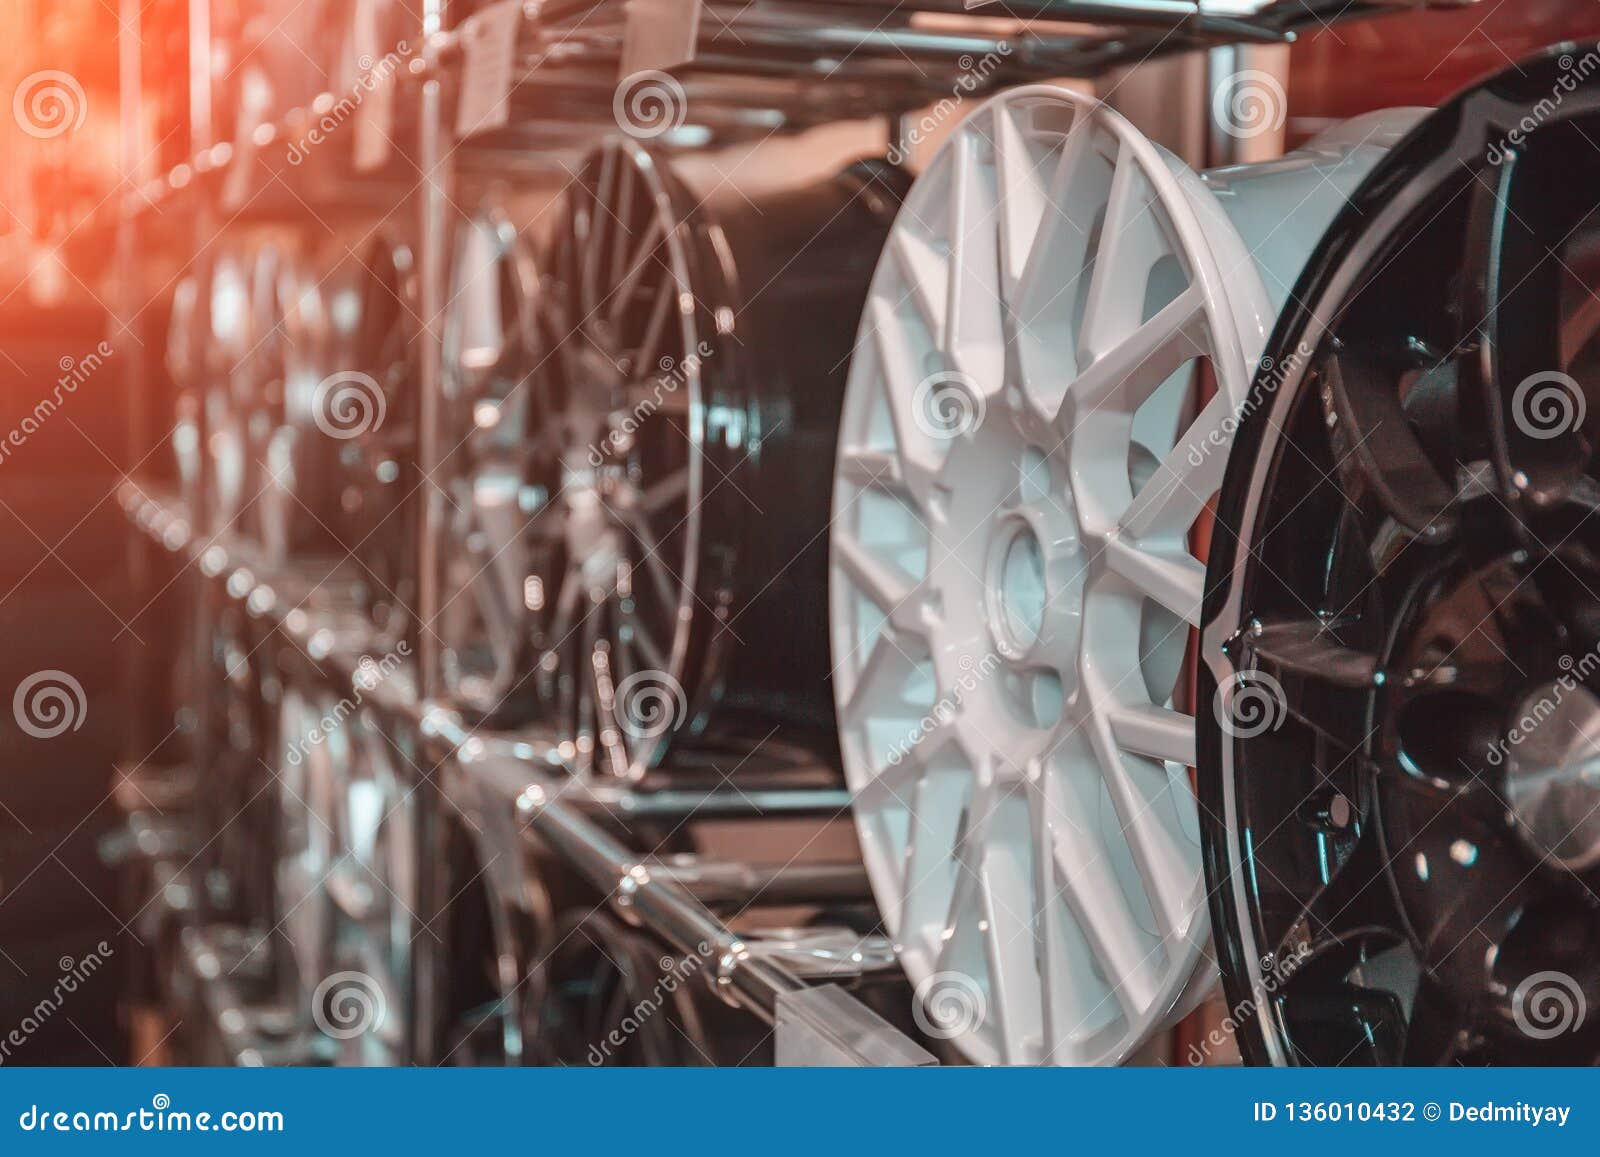 car rims or wheels in store, rows of new alloy automobile disks